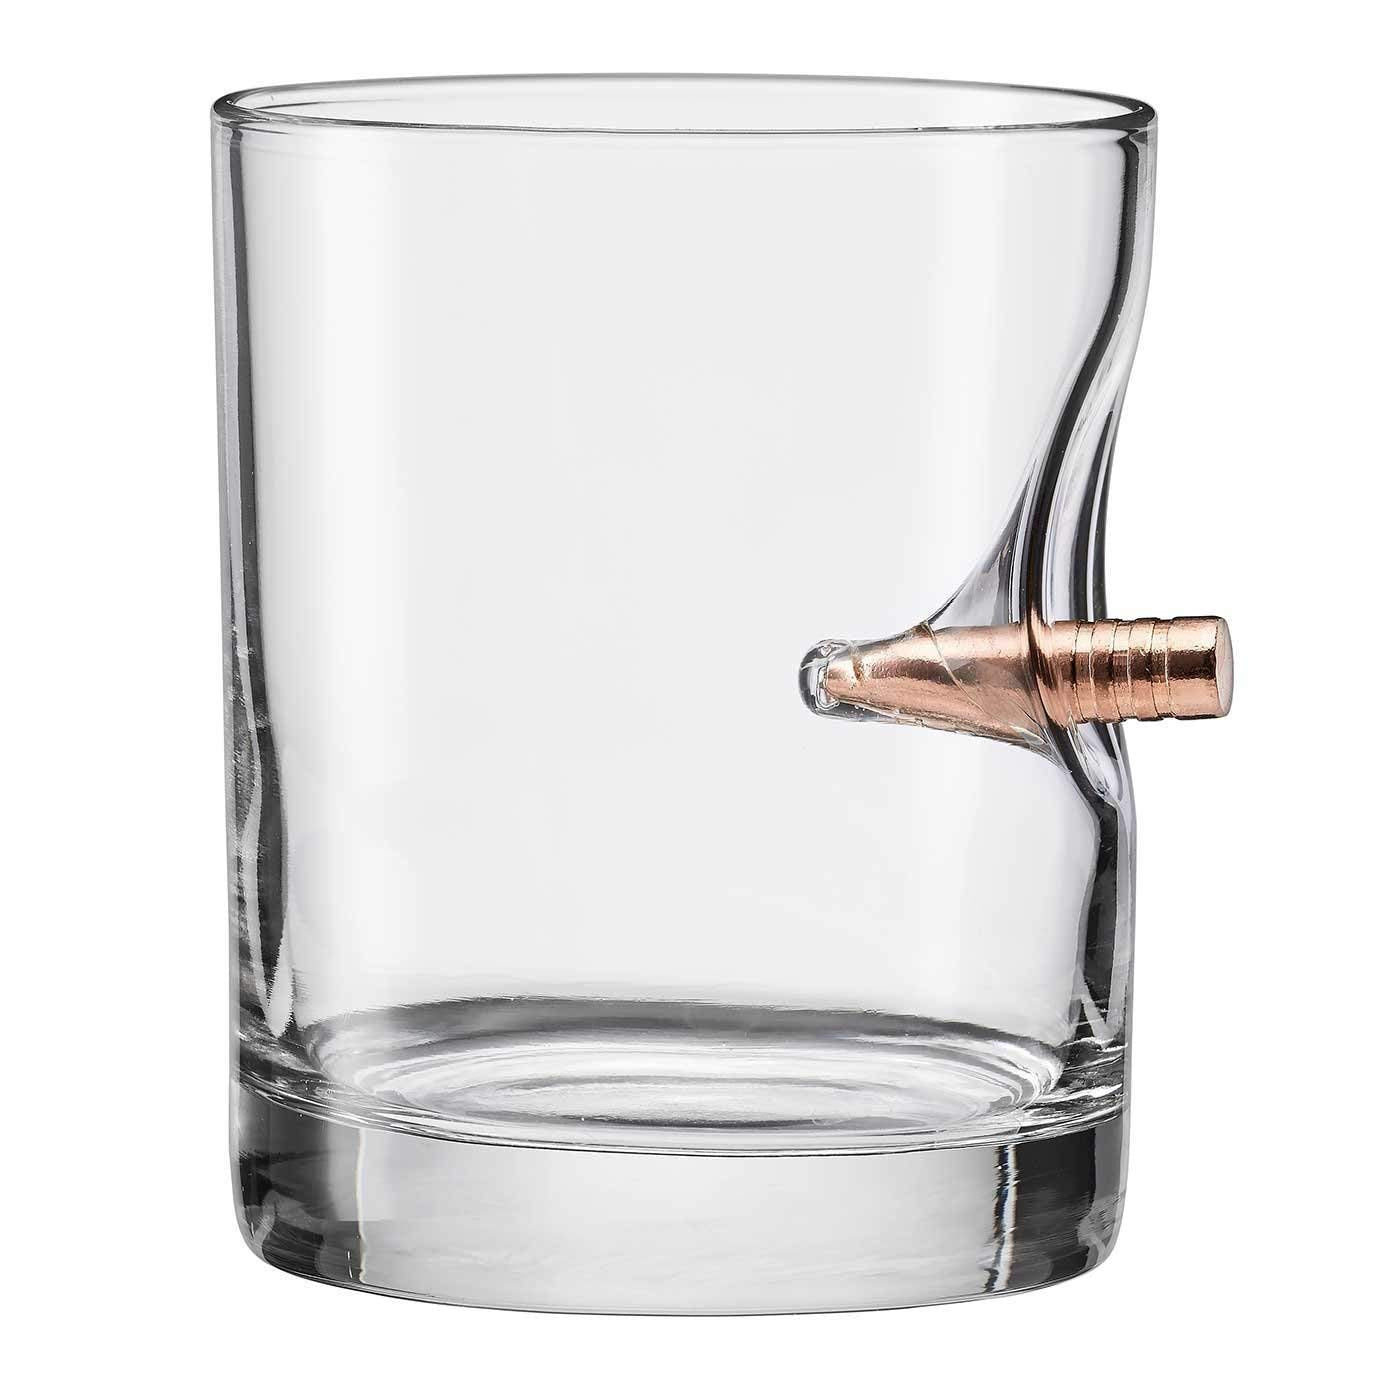 The Original Benshot Bullet Rocks Glass with Real .308 Bullet - 11Oz | Made in the USA Animals & Pet Supplies > Pet Supplies > Dog Supplies > Dog Apparel BenShot   